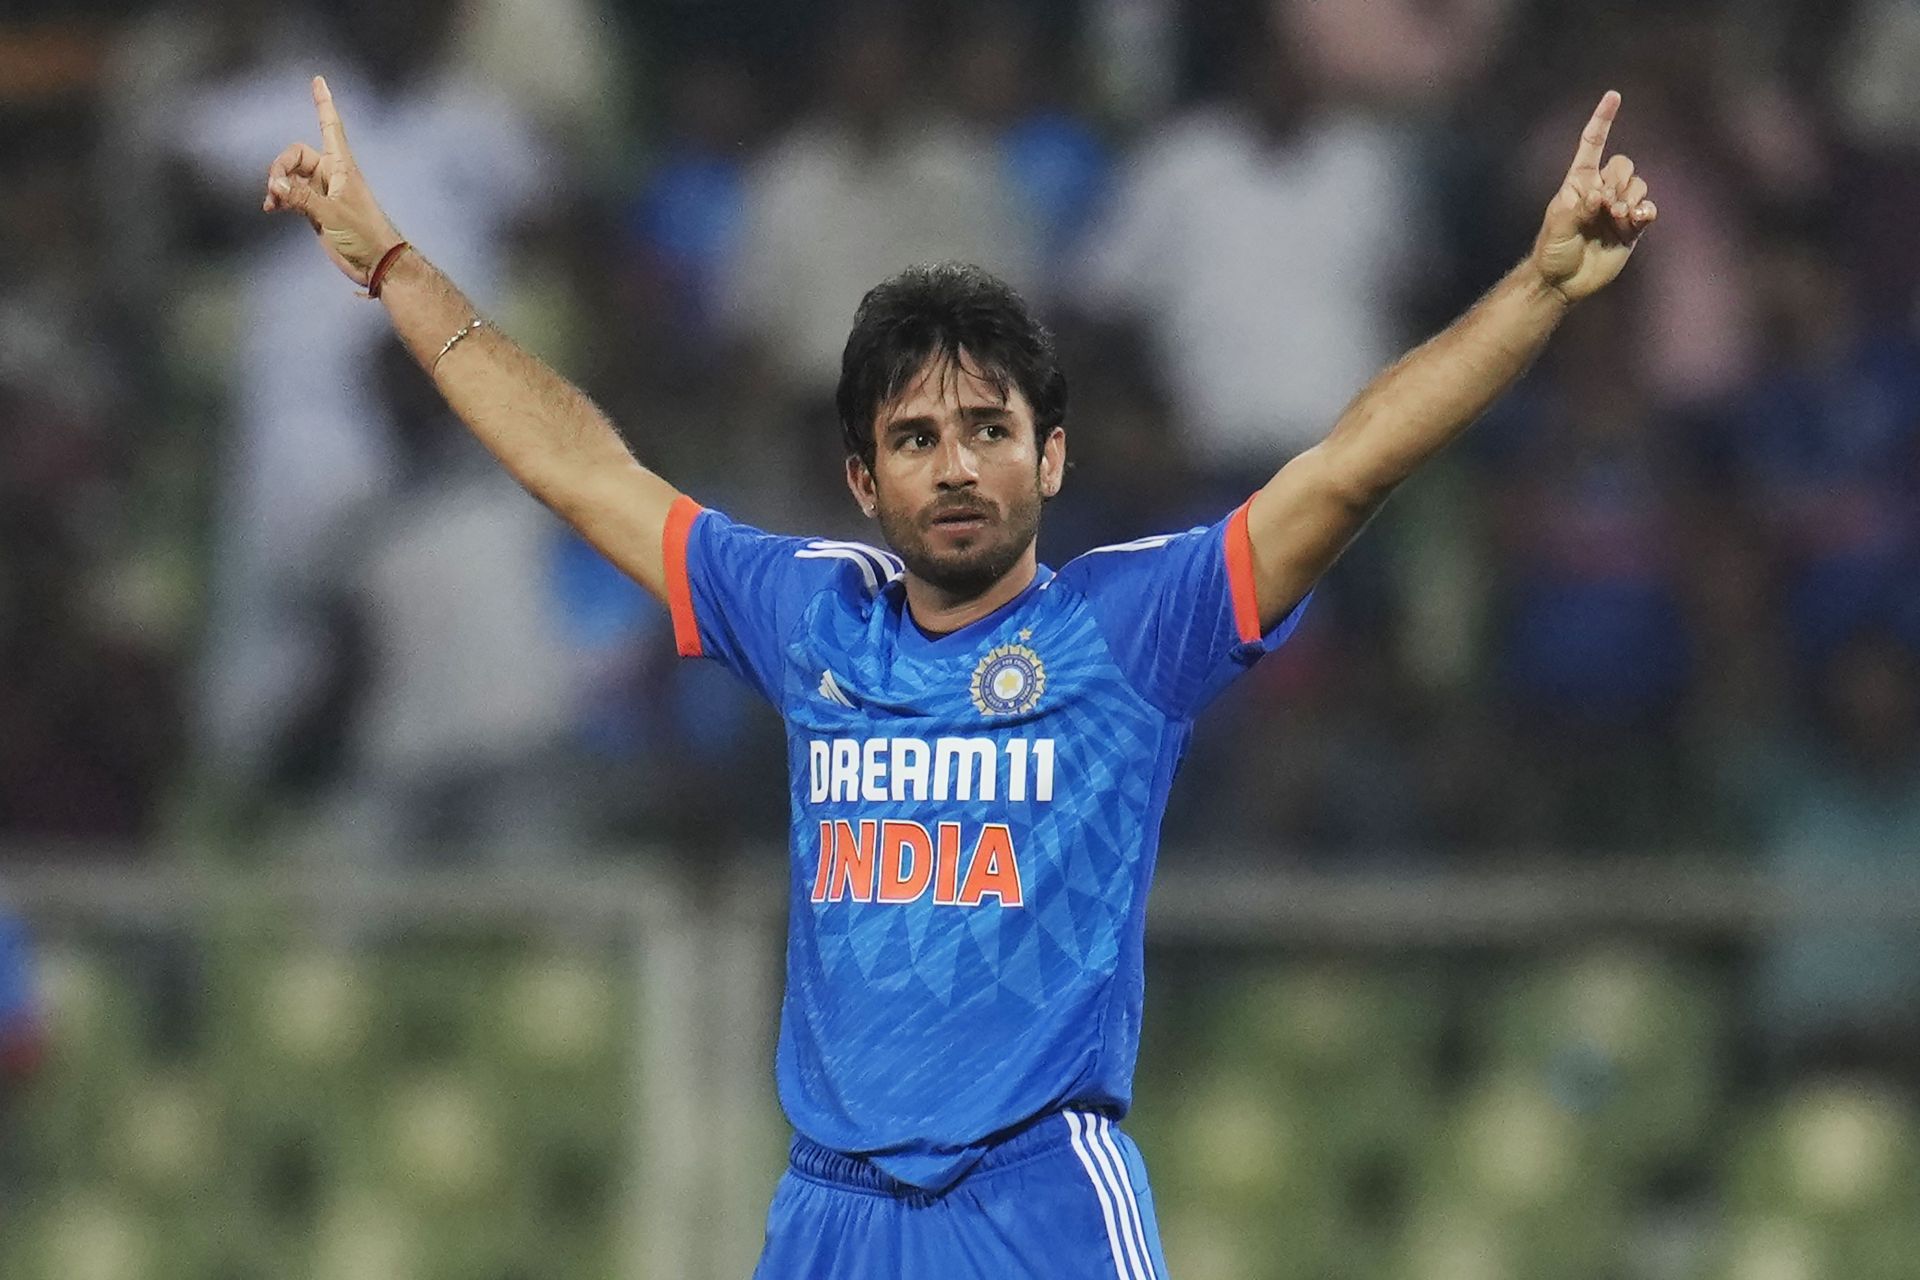 Ravi Bishnoi bowled a threatening spell in the second T20I